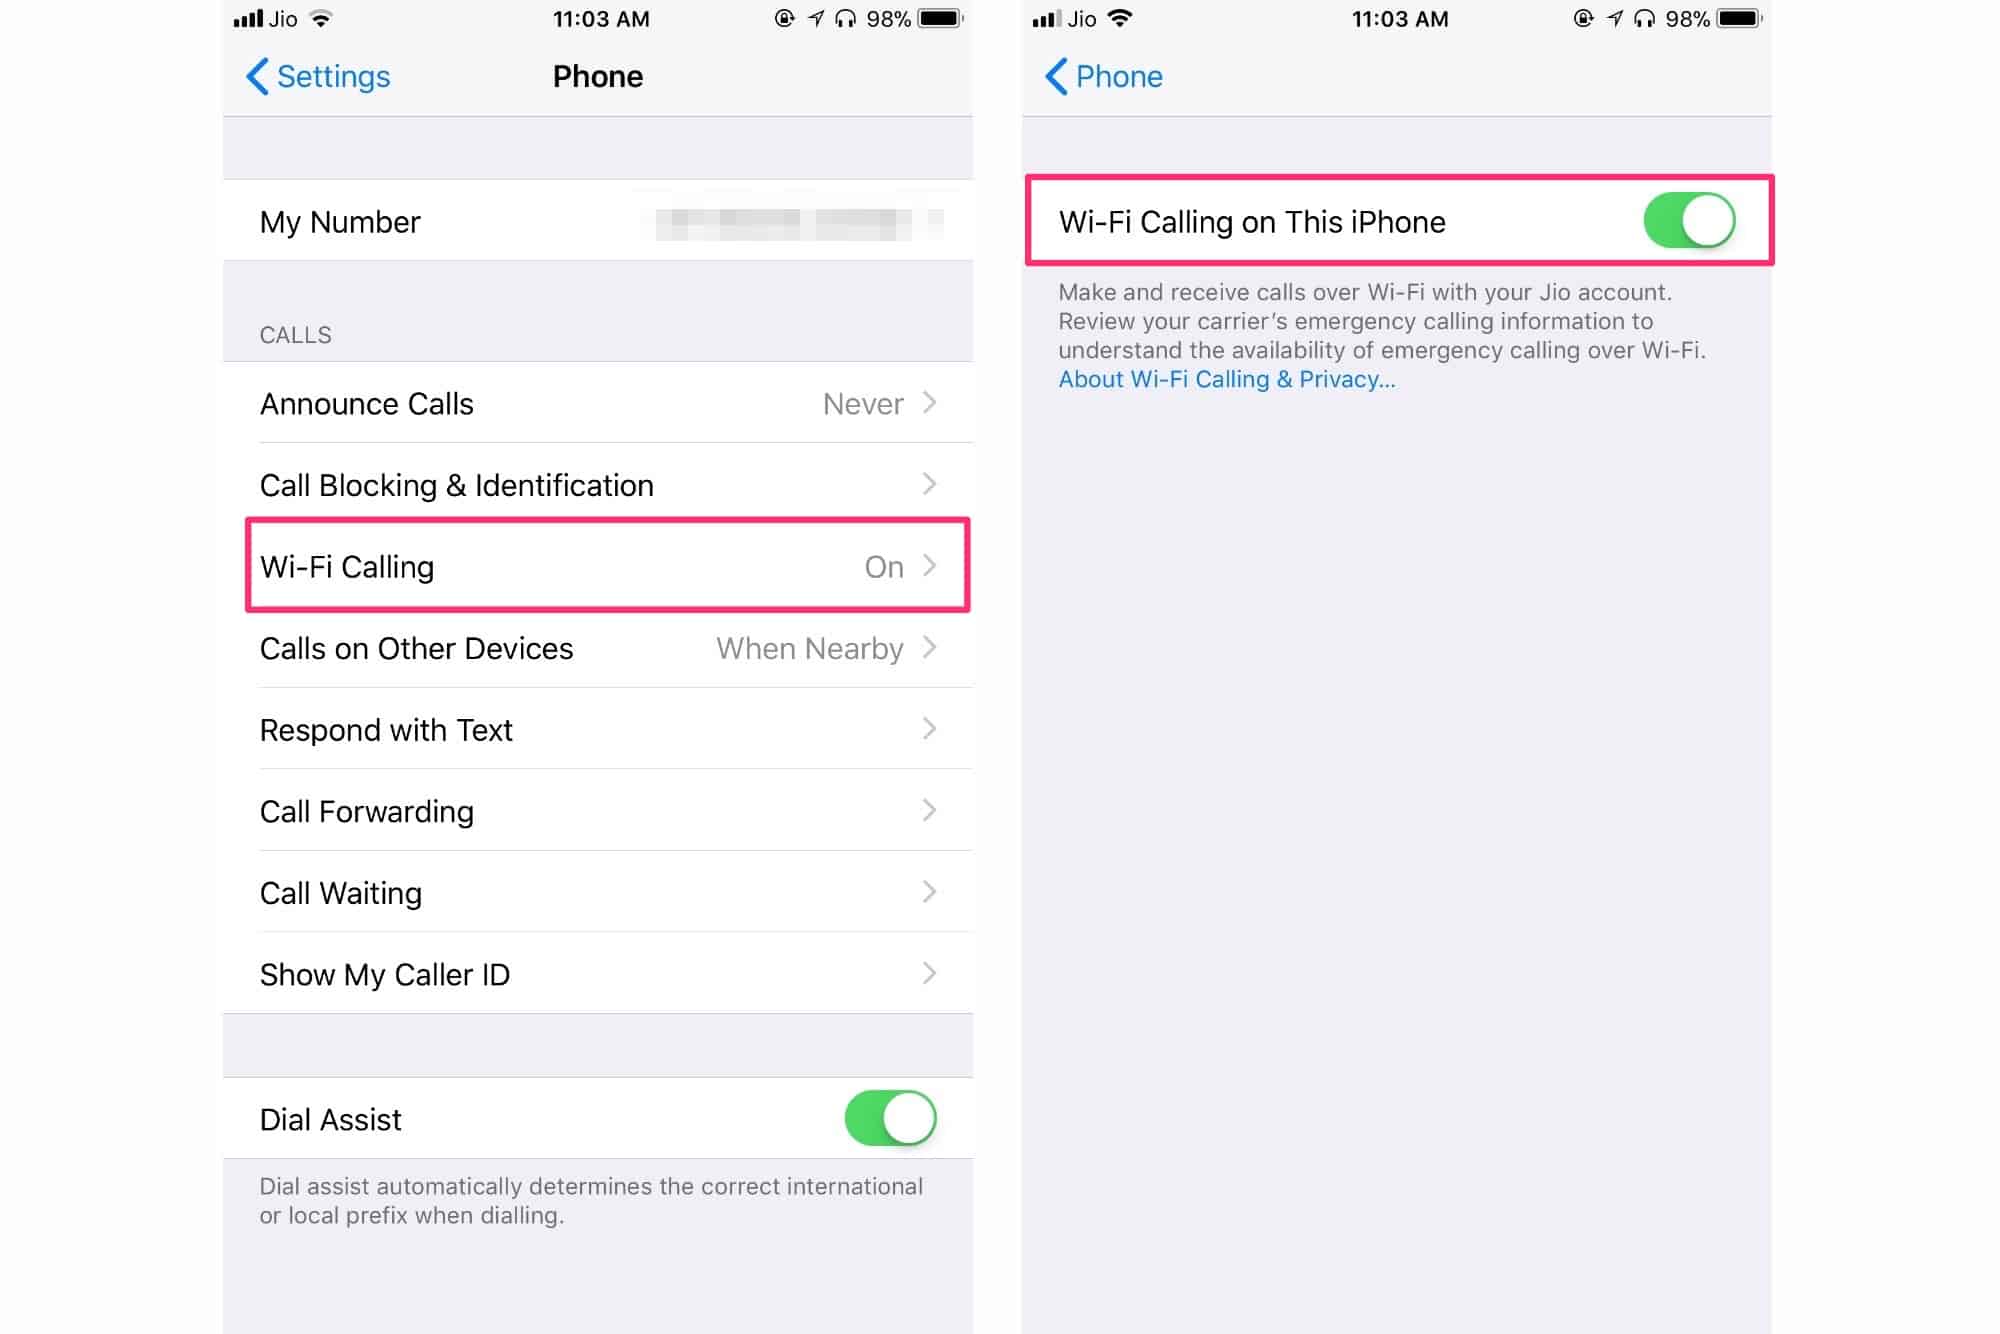 Enable Wi-Fi Calling iPhone